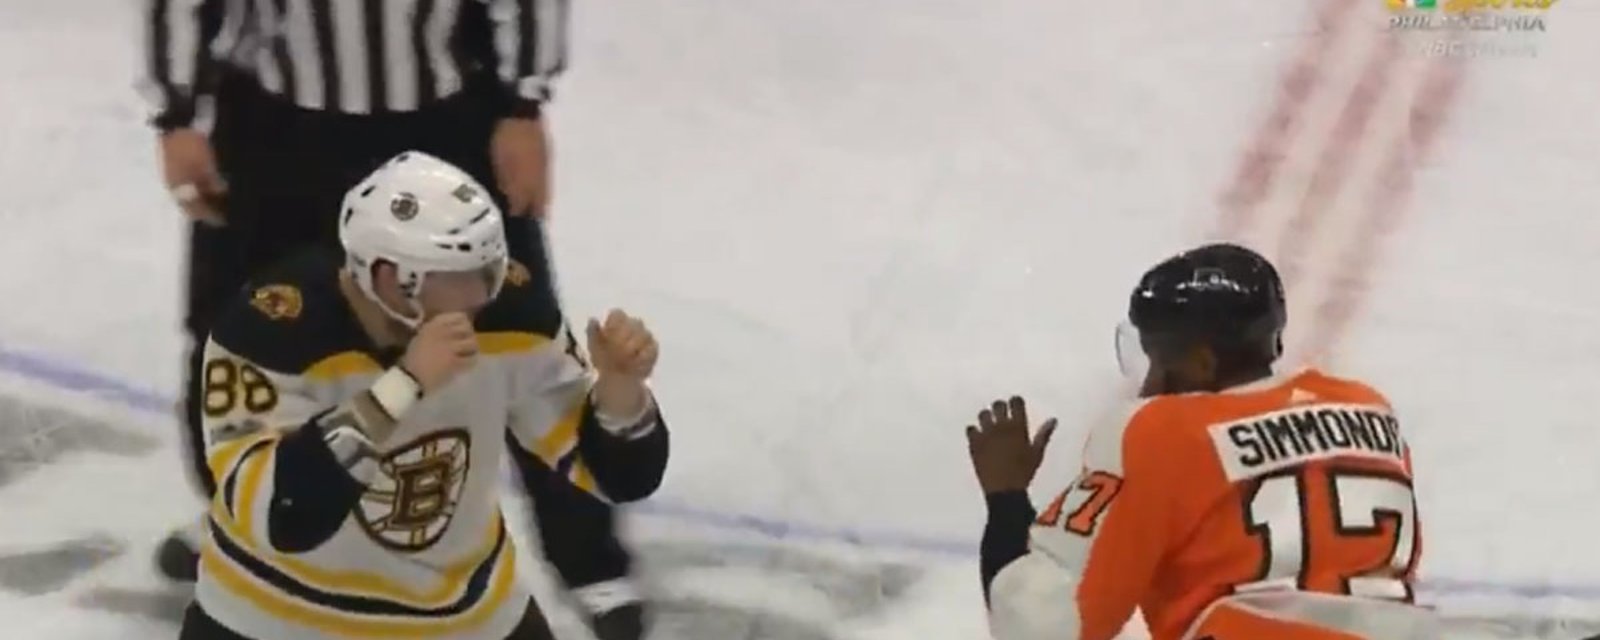 Wayne Simmonds drops the gloves, throws some HEAVY punches on Kevan Miller